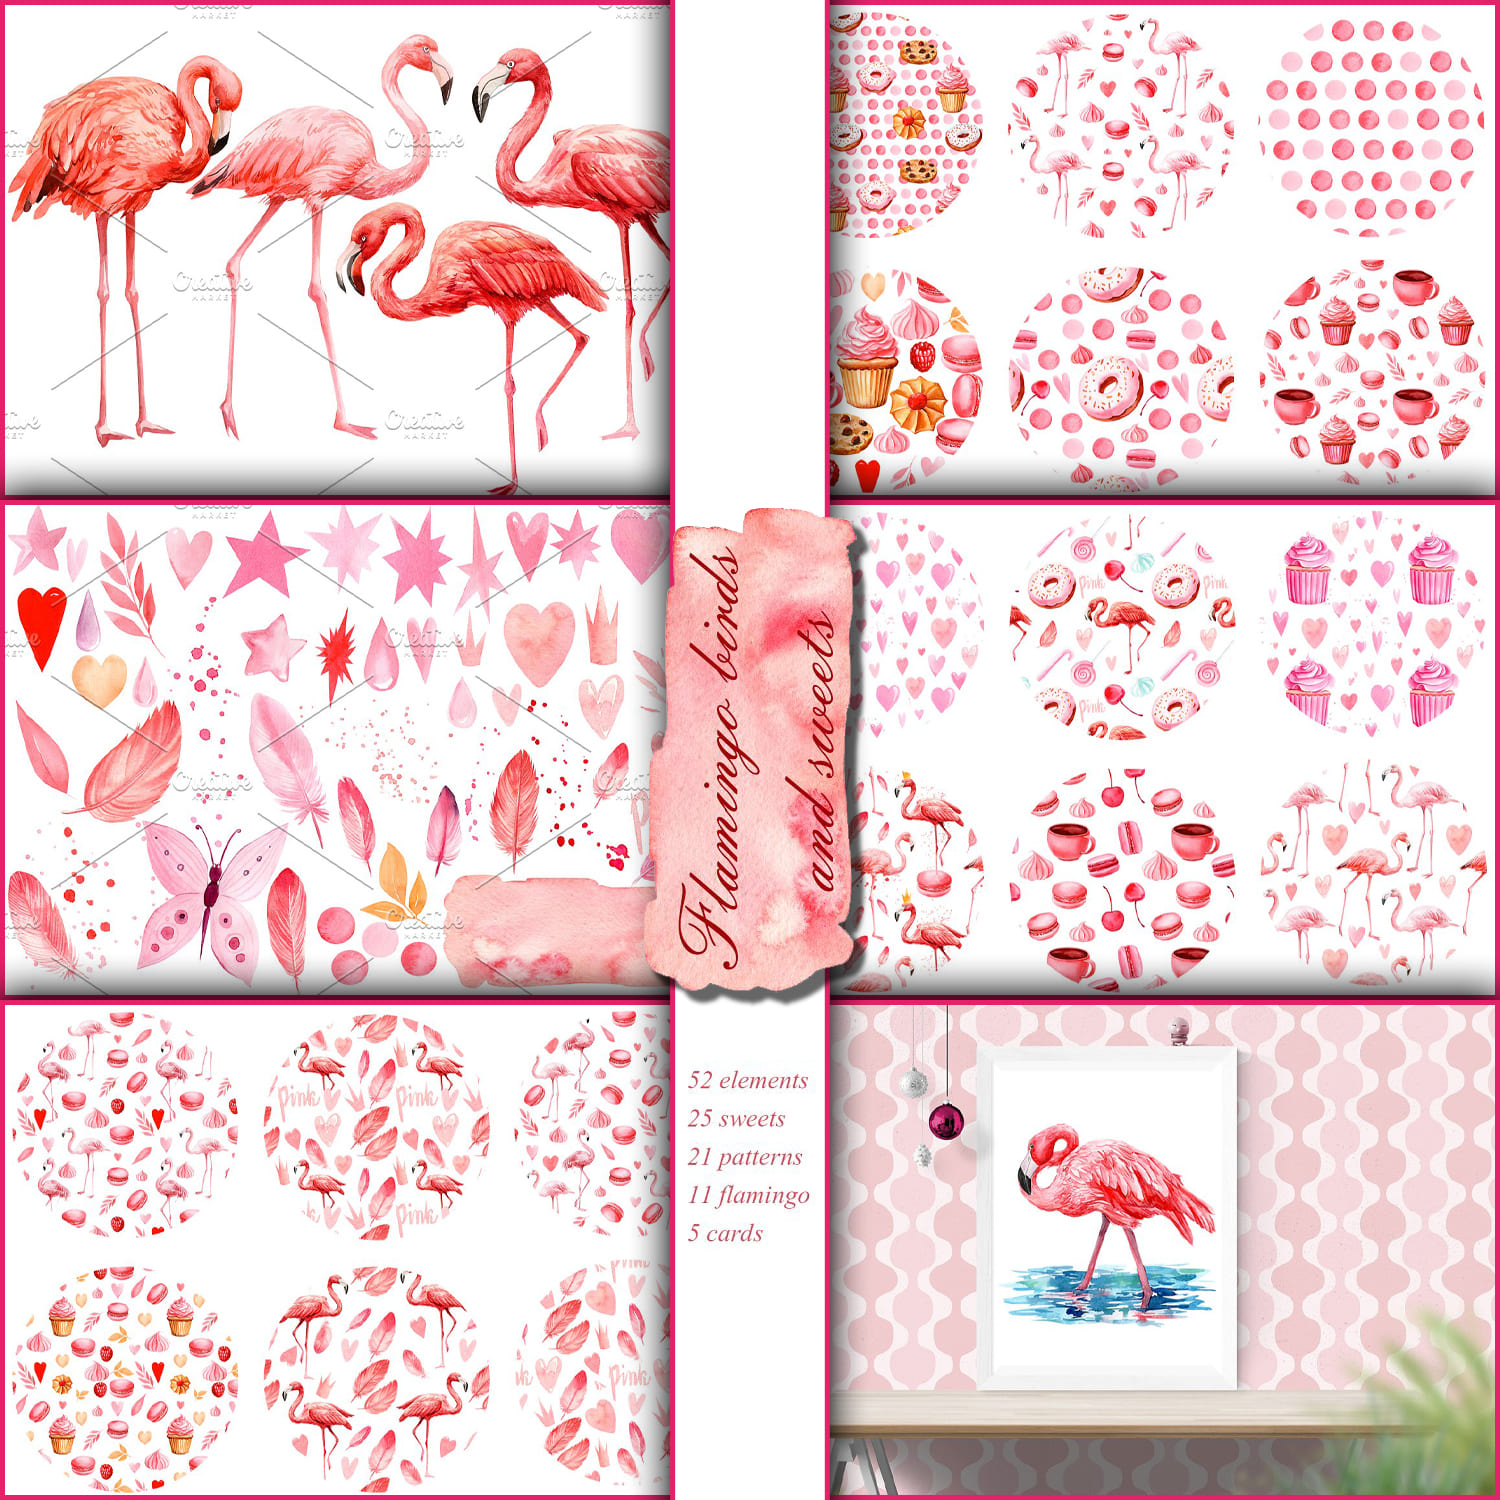 21 patterns of Flamingo Birds and Sweets.